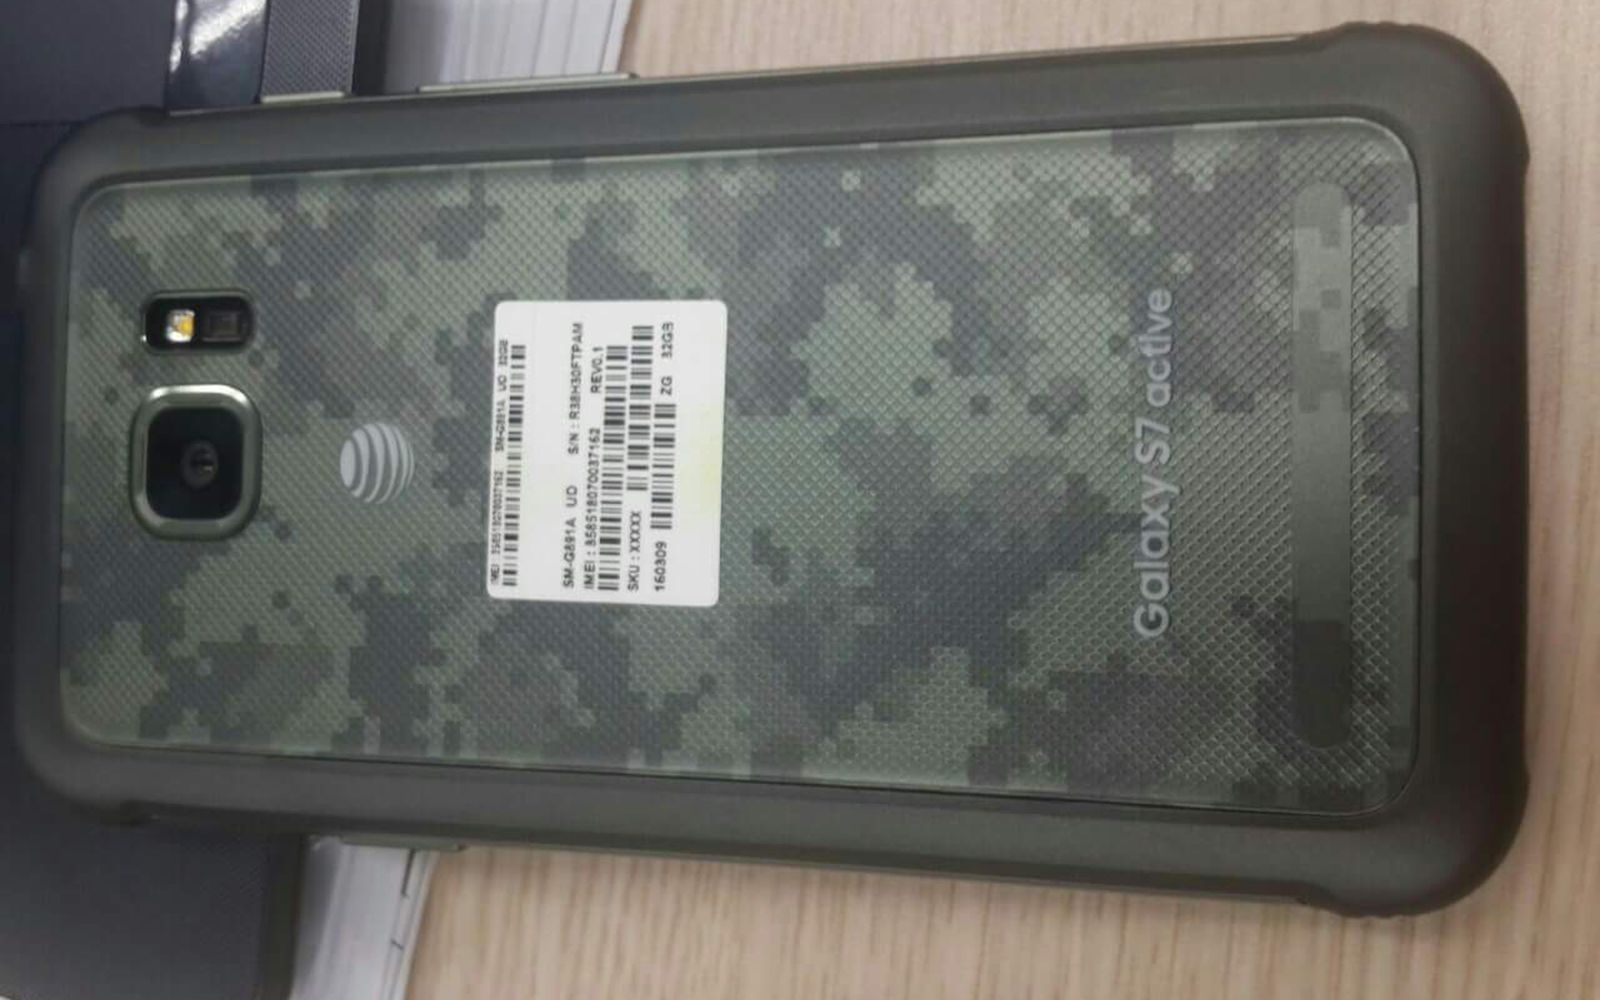 samsung galaxy s7 active tough phone is real shown off in pictures image 1